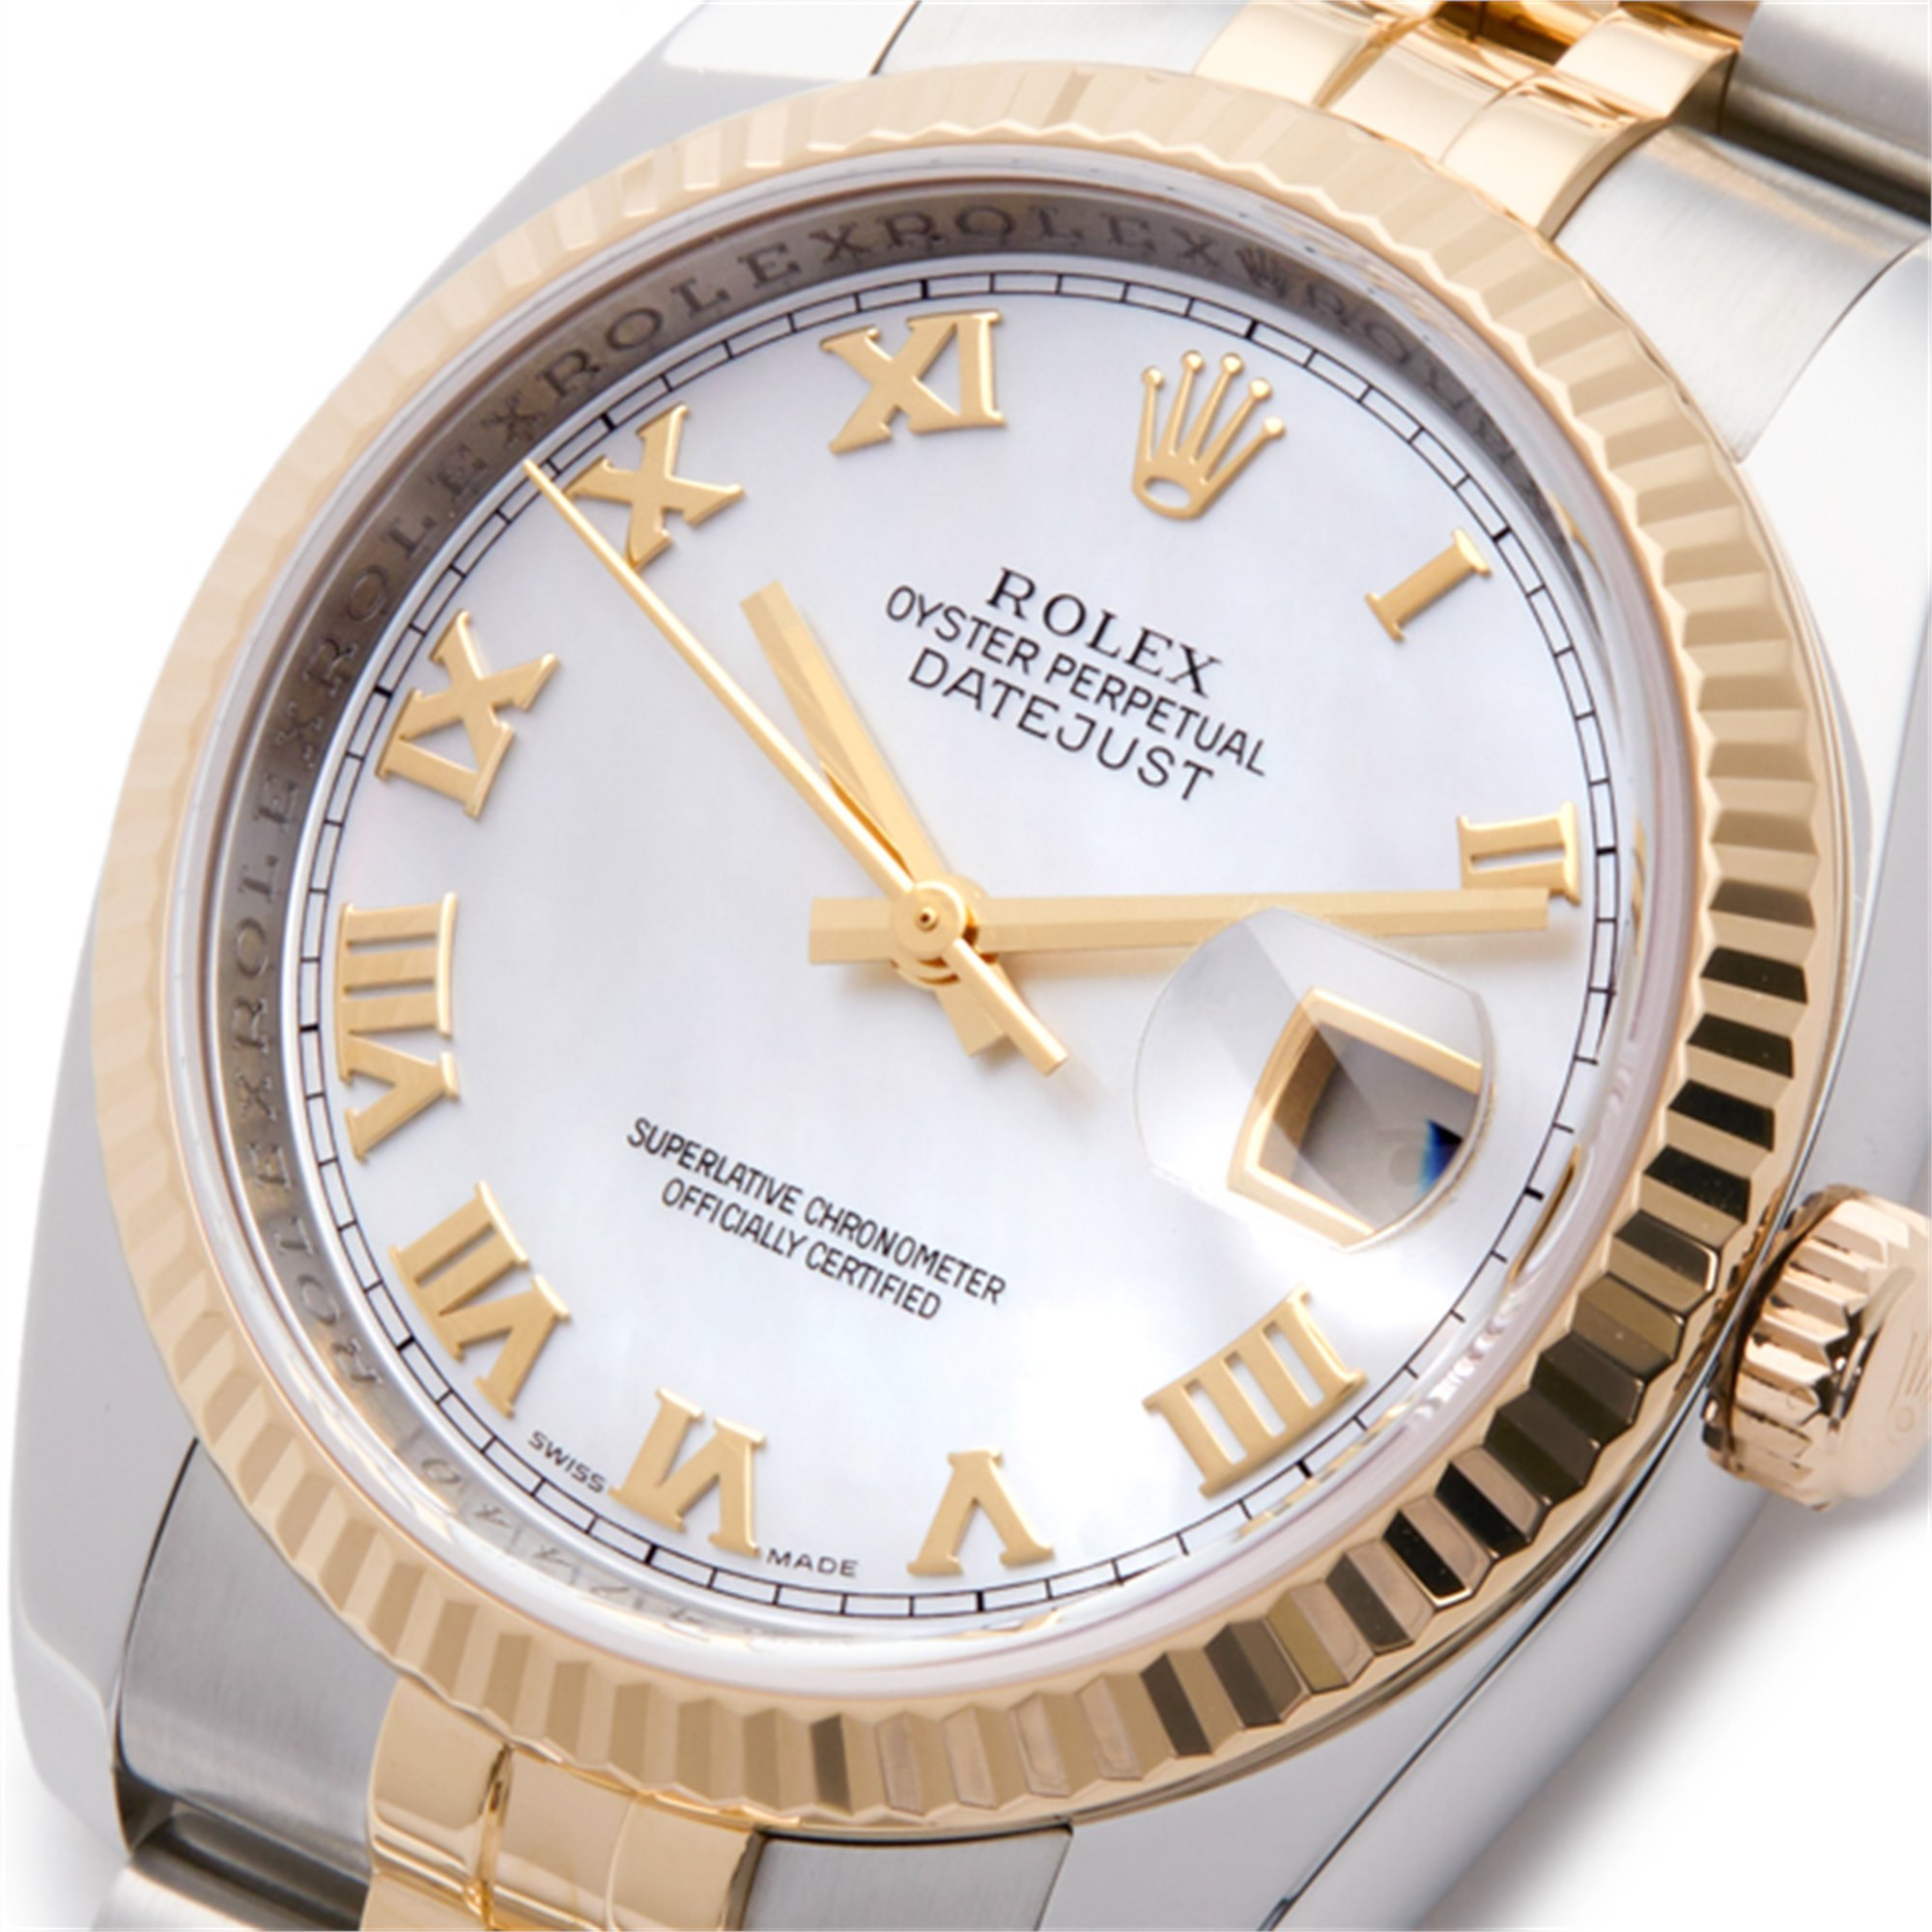 Rolex Datejust 36 Roestvrij Staal 116233